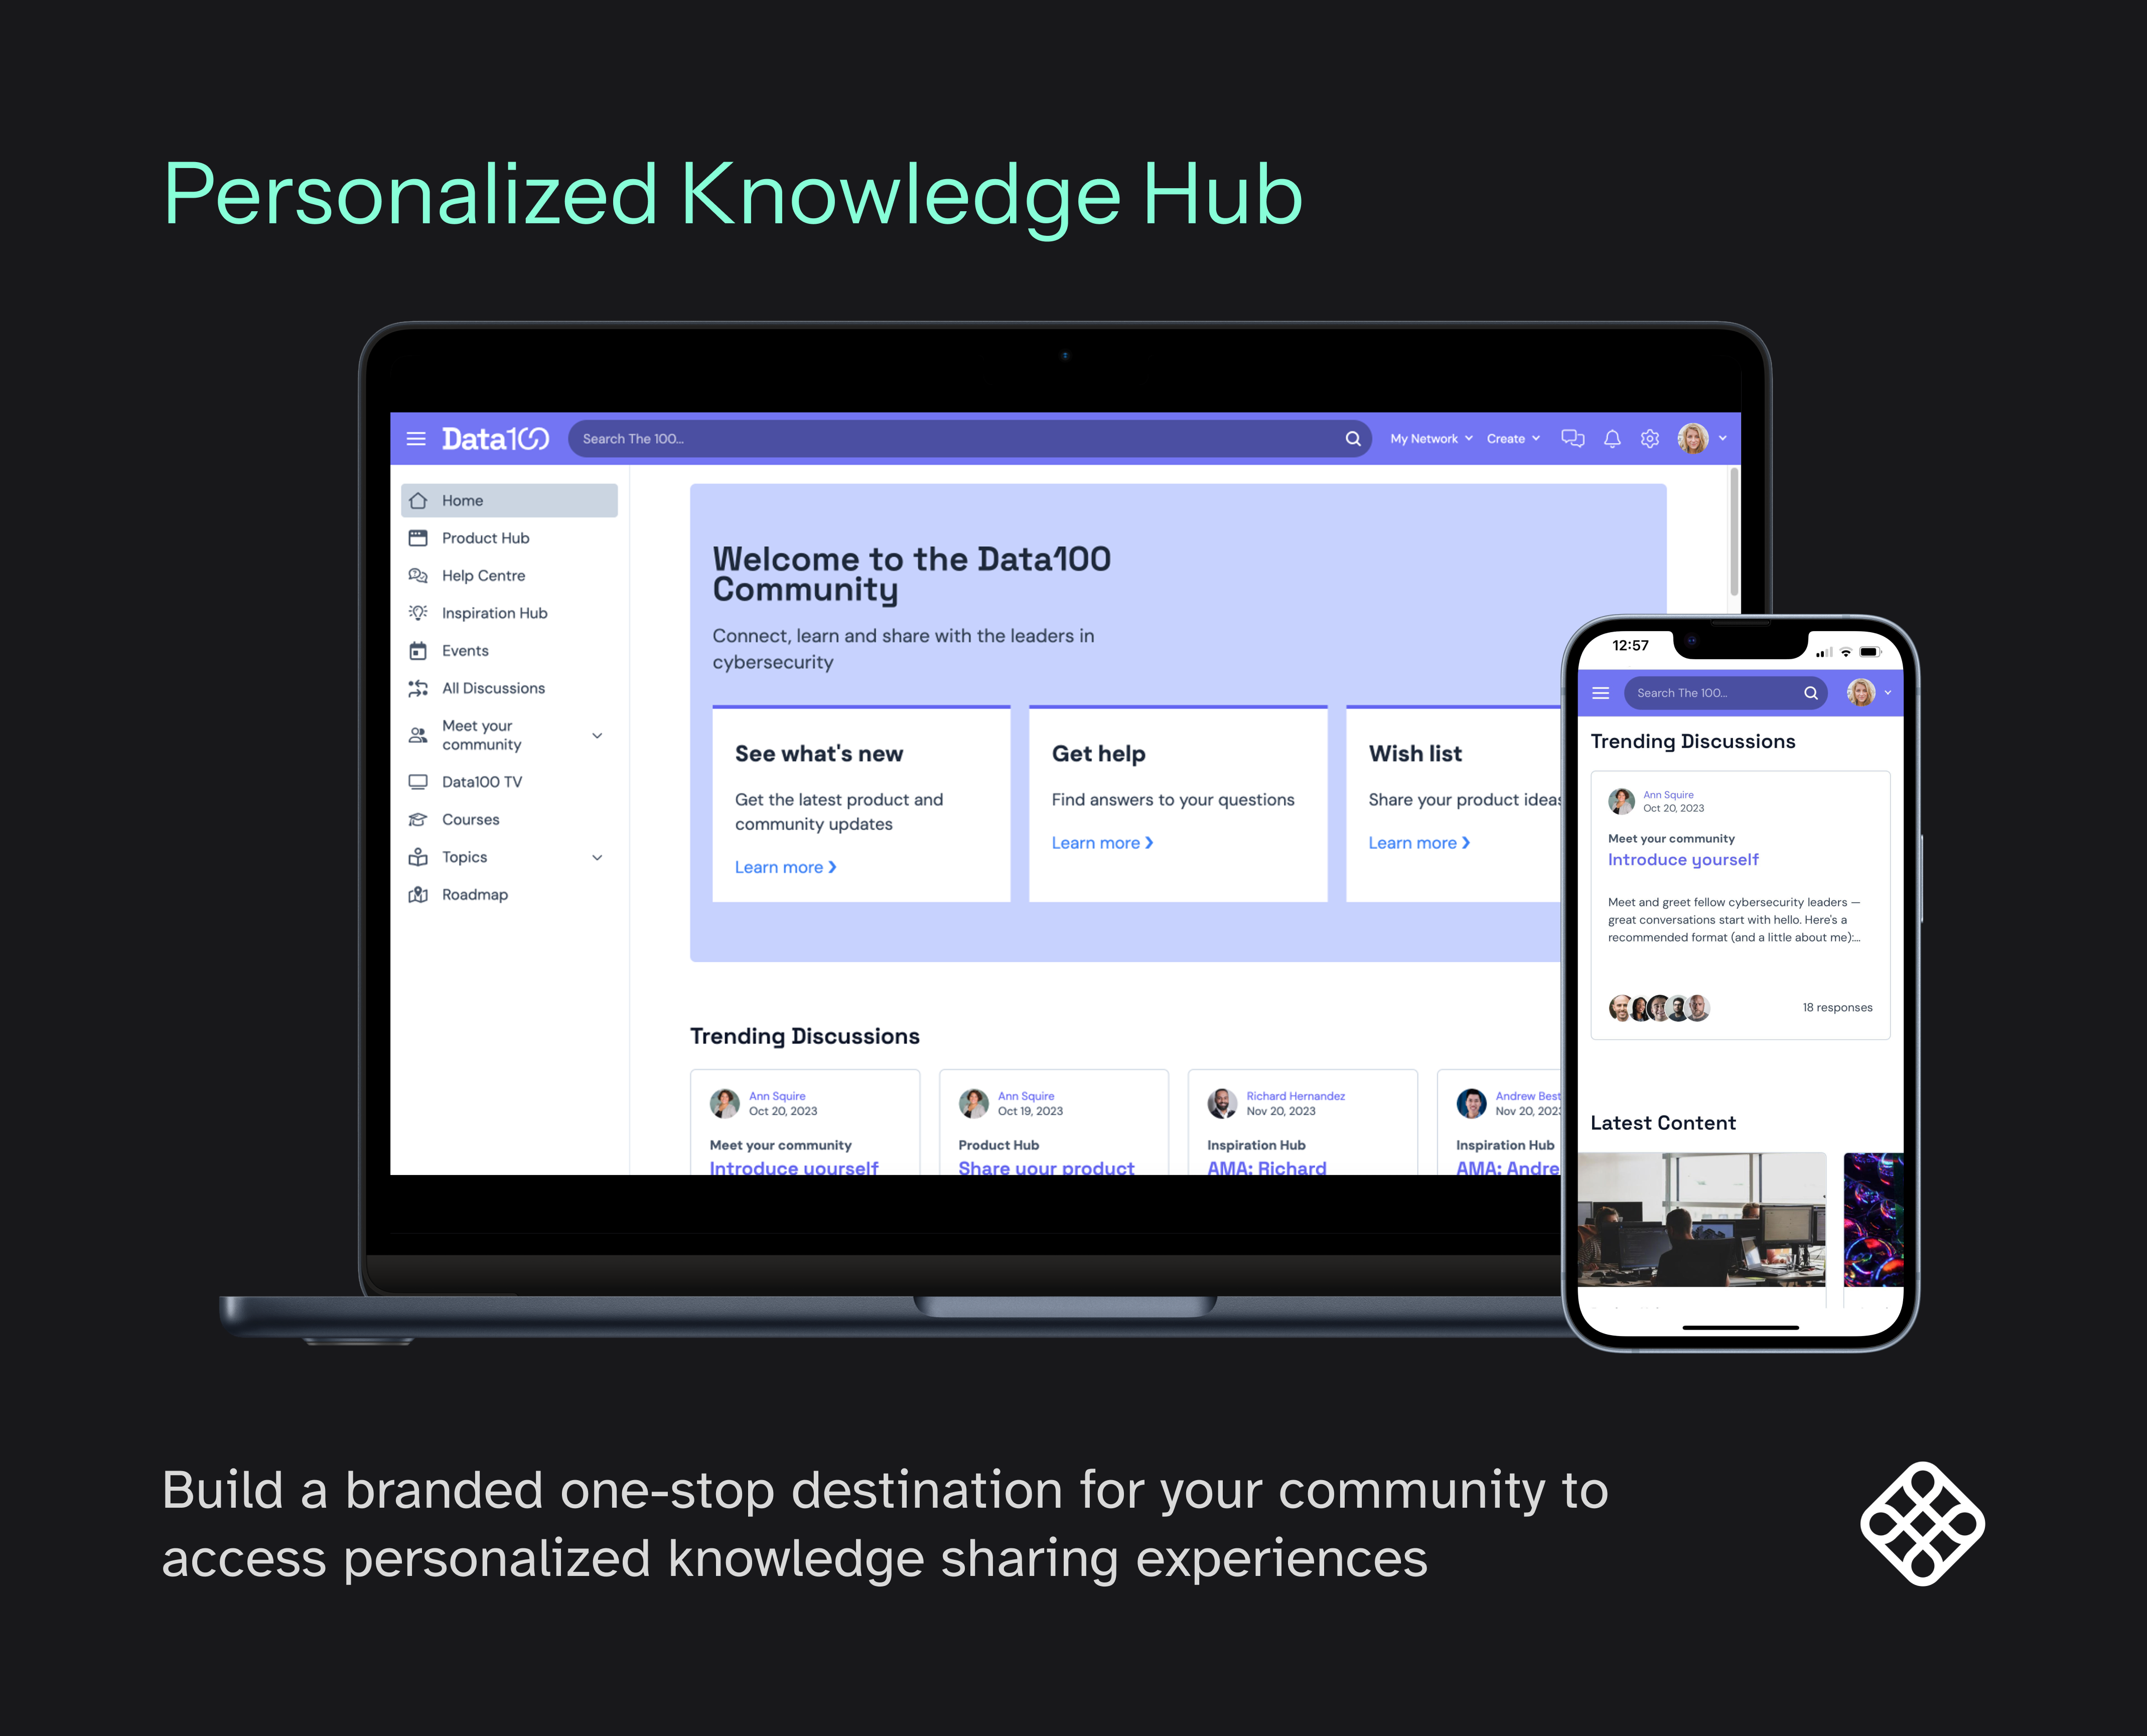 Build a branded one-stop destination for your community to access personalized knowledge sharing experiences